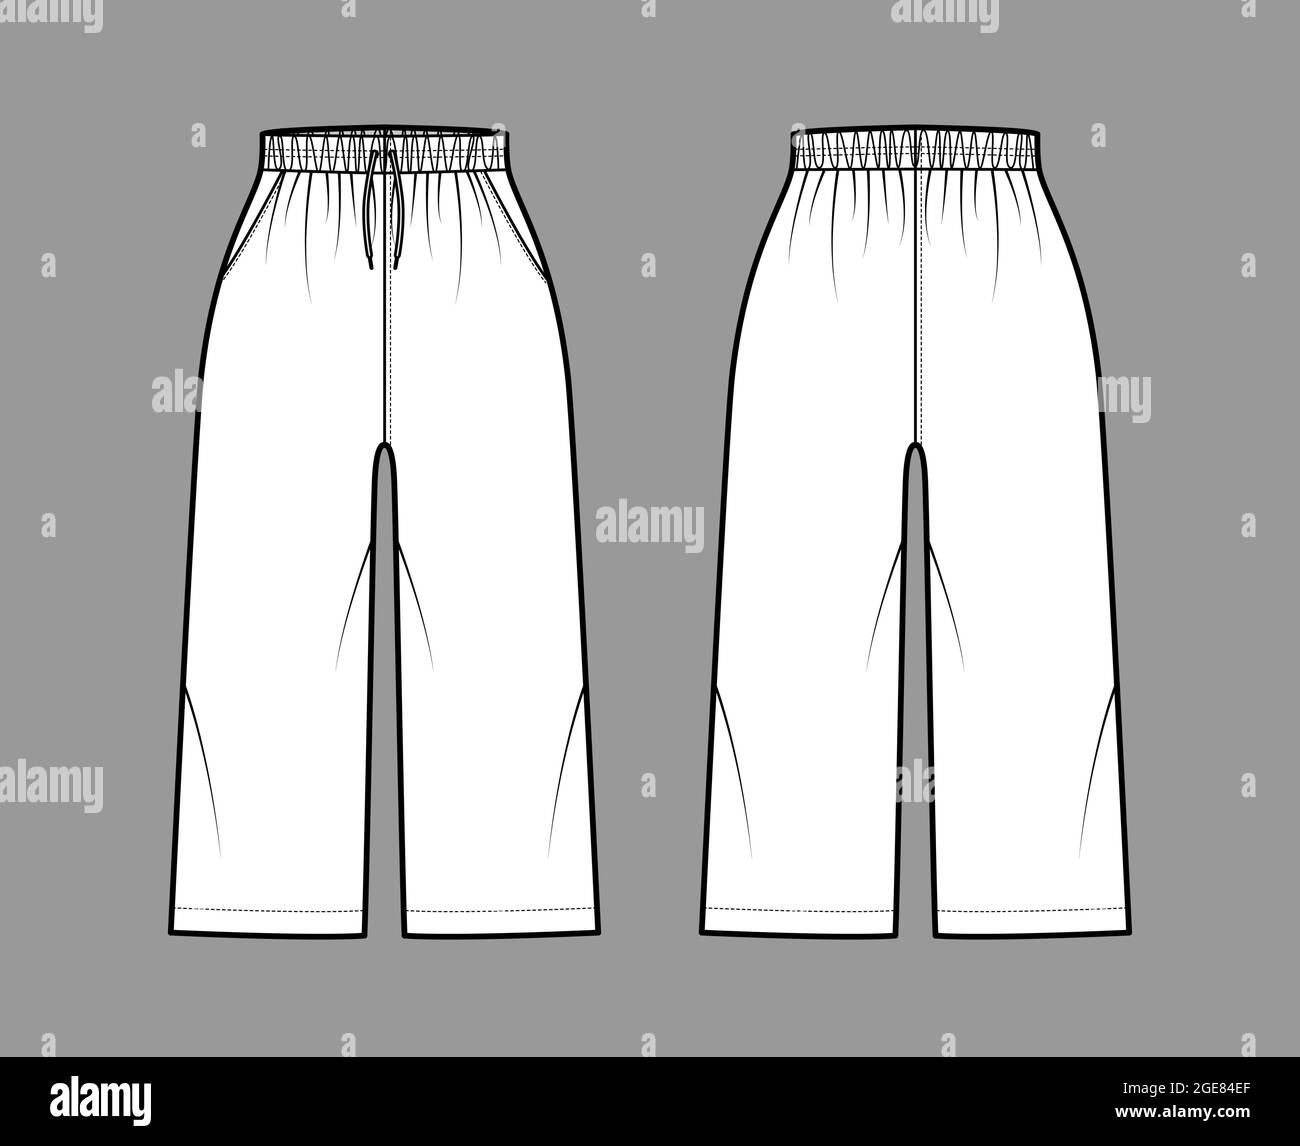 Bermuda shorts Activewear technical fashion illustration with elastic normal waist, high rise, drawstrings, pockets, Relaxed, calf length. Flat bottom apparel template front, back, white color. Women Stock Vector